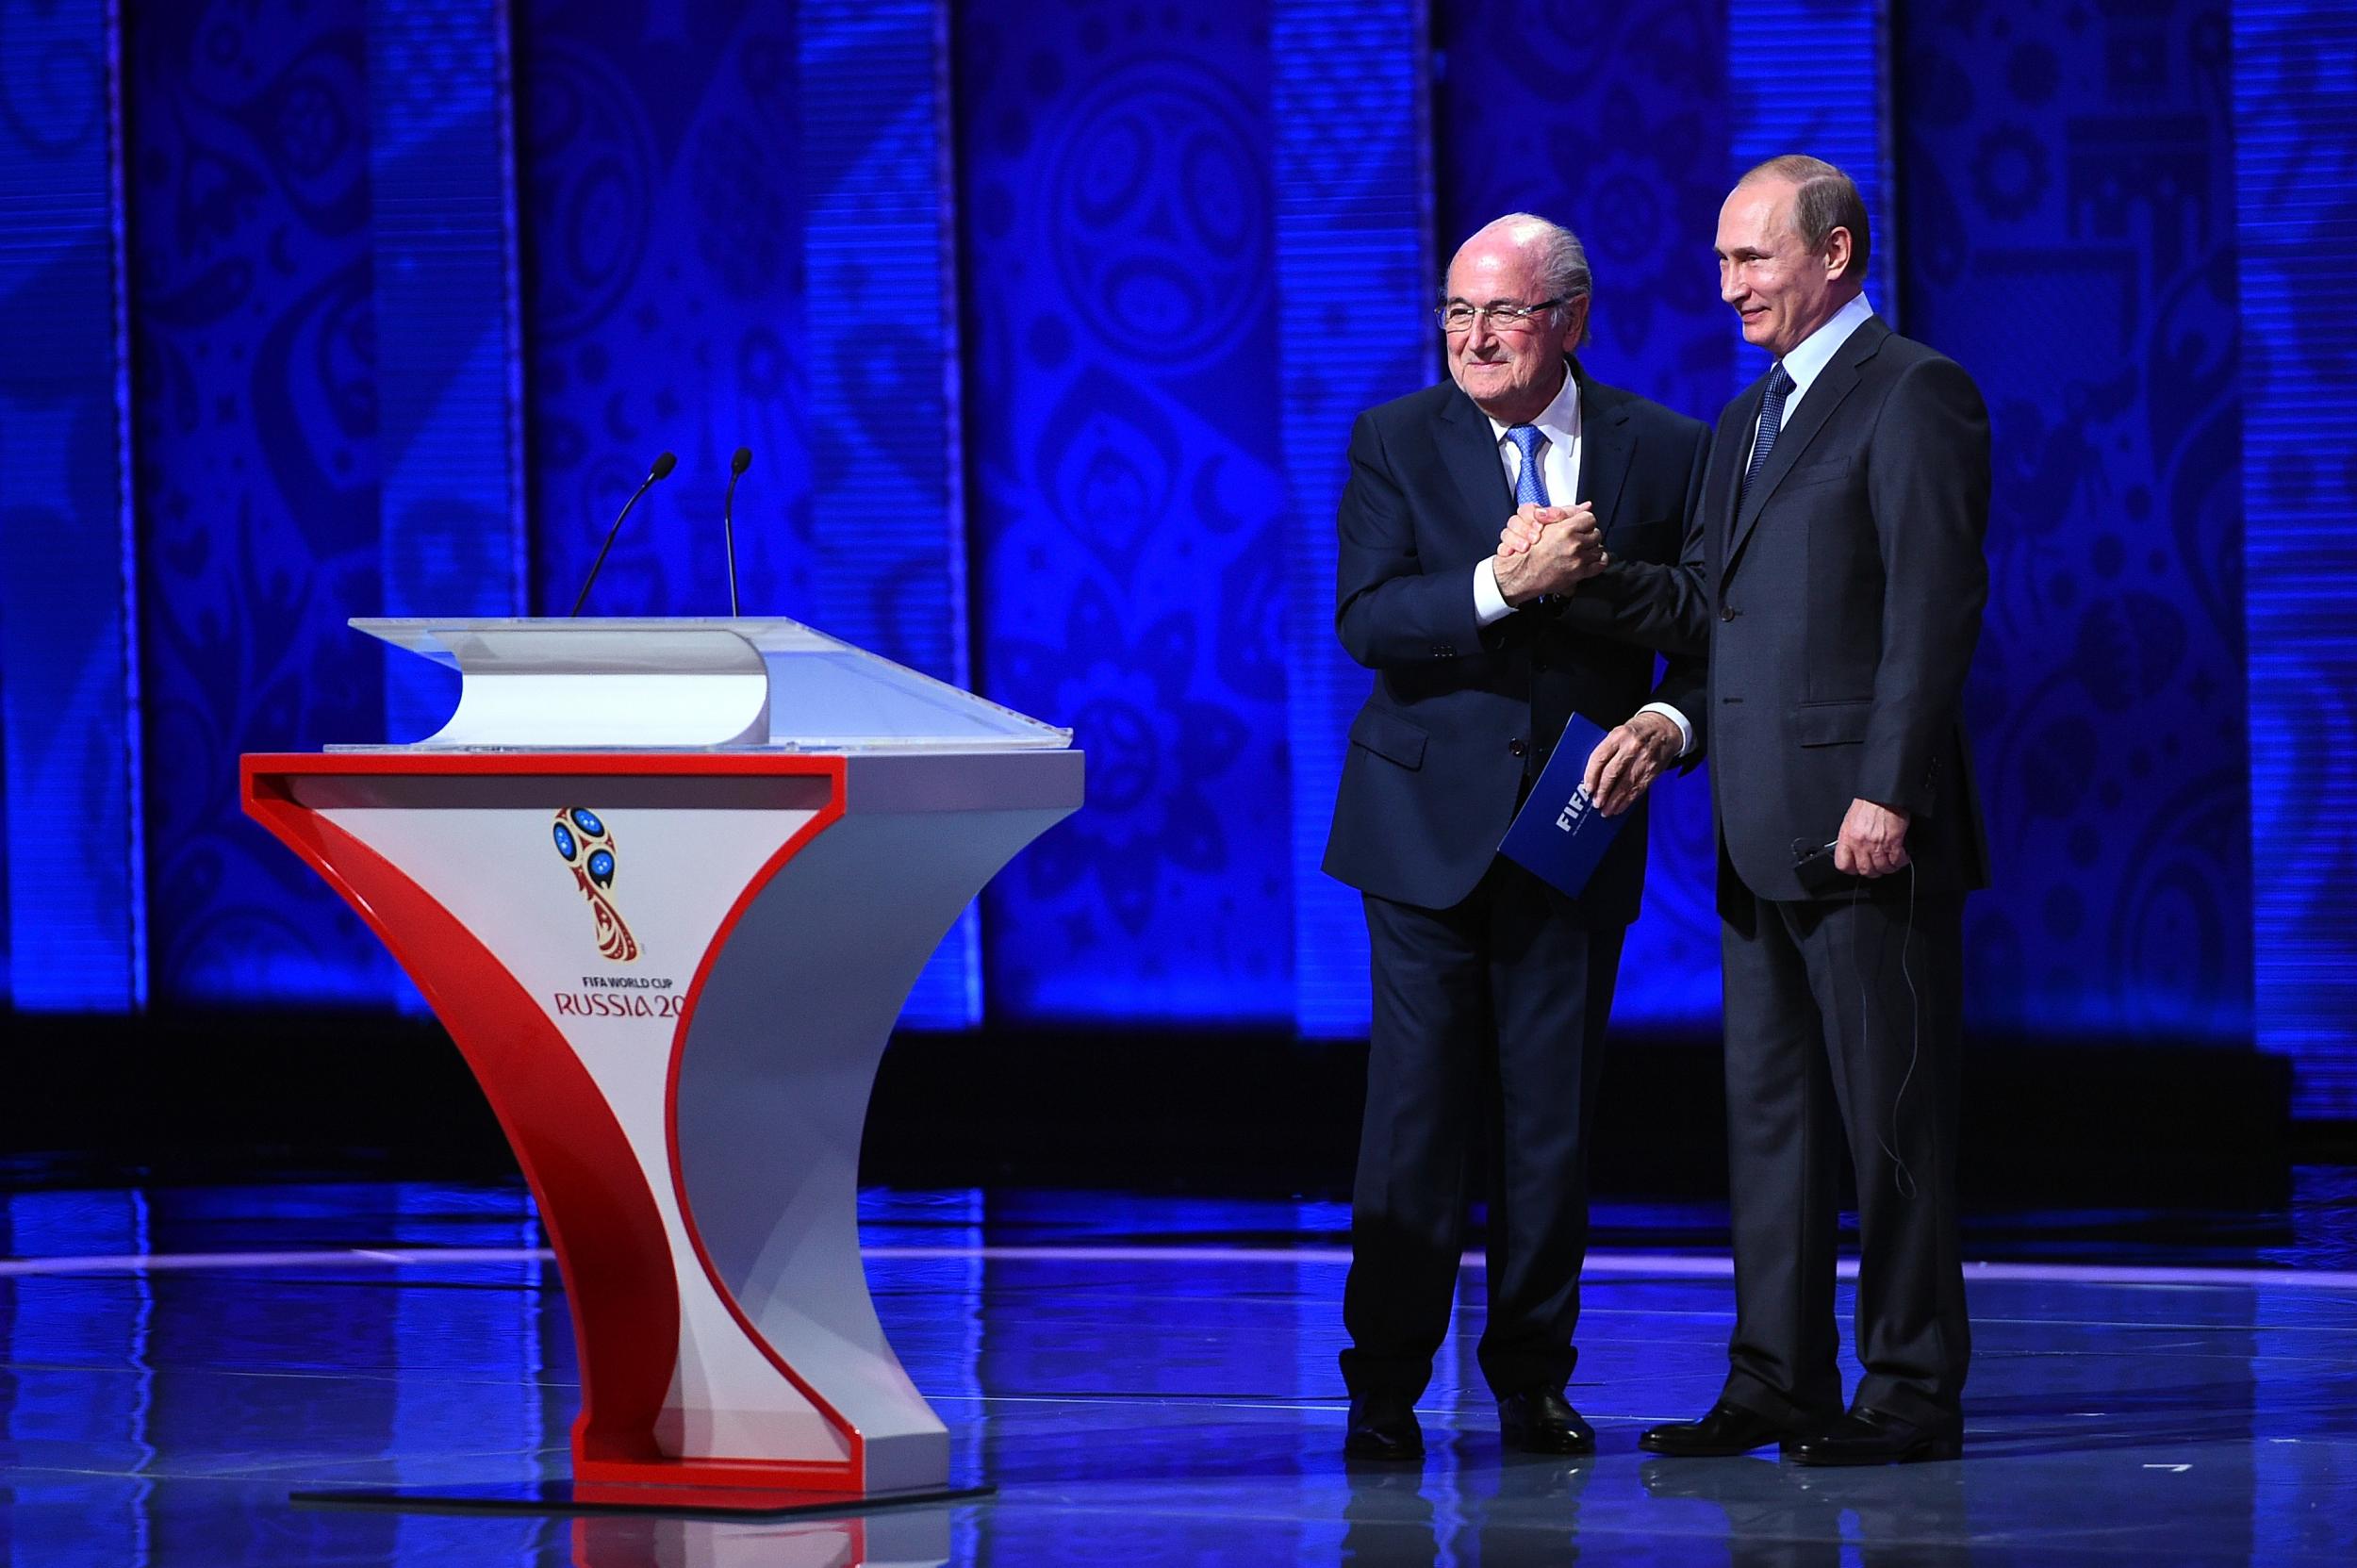 Putin thinks the suspended Fifa boss should be awarded a Nobel prize